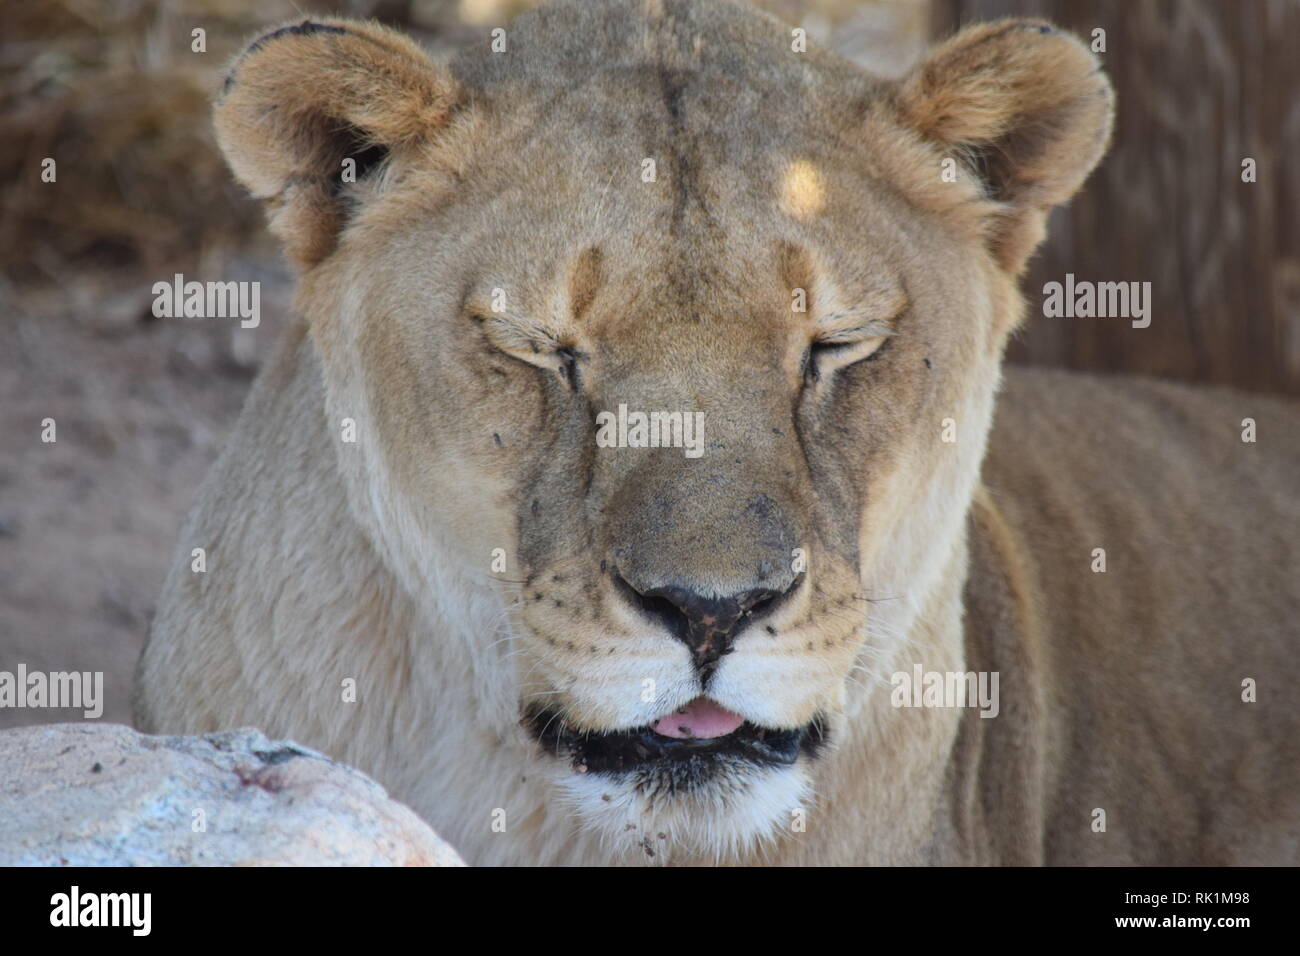 Lions and lionesses at the Out of Africa sanctuary in Arizona Stock Photo